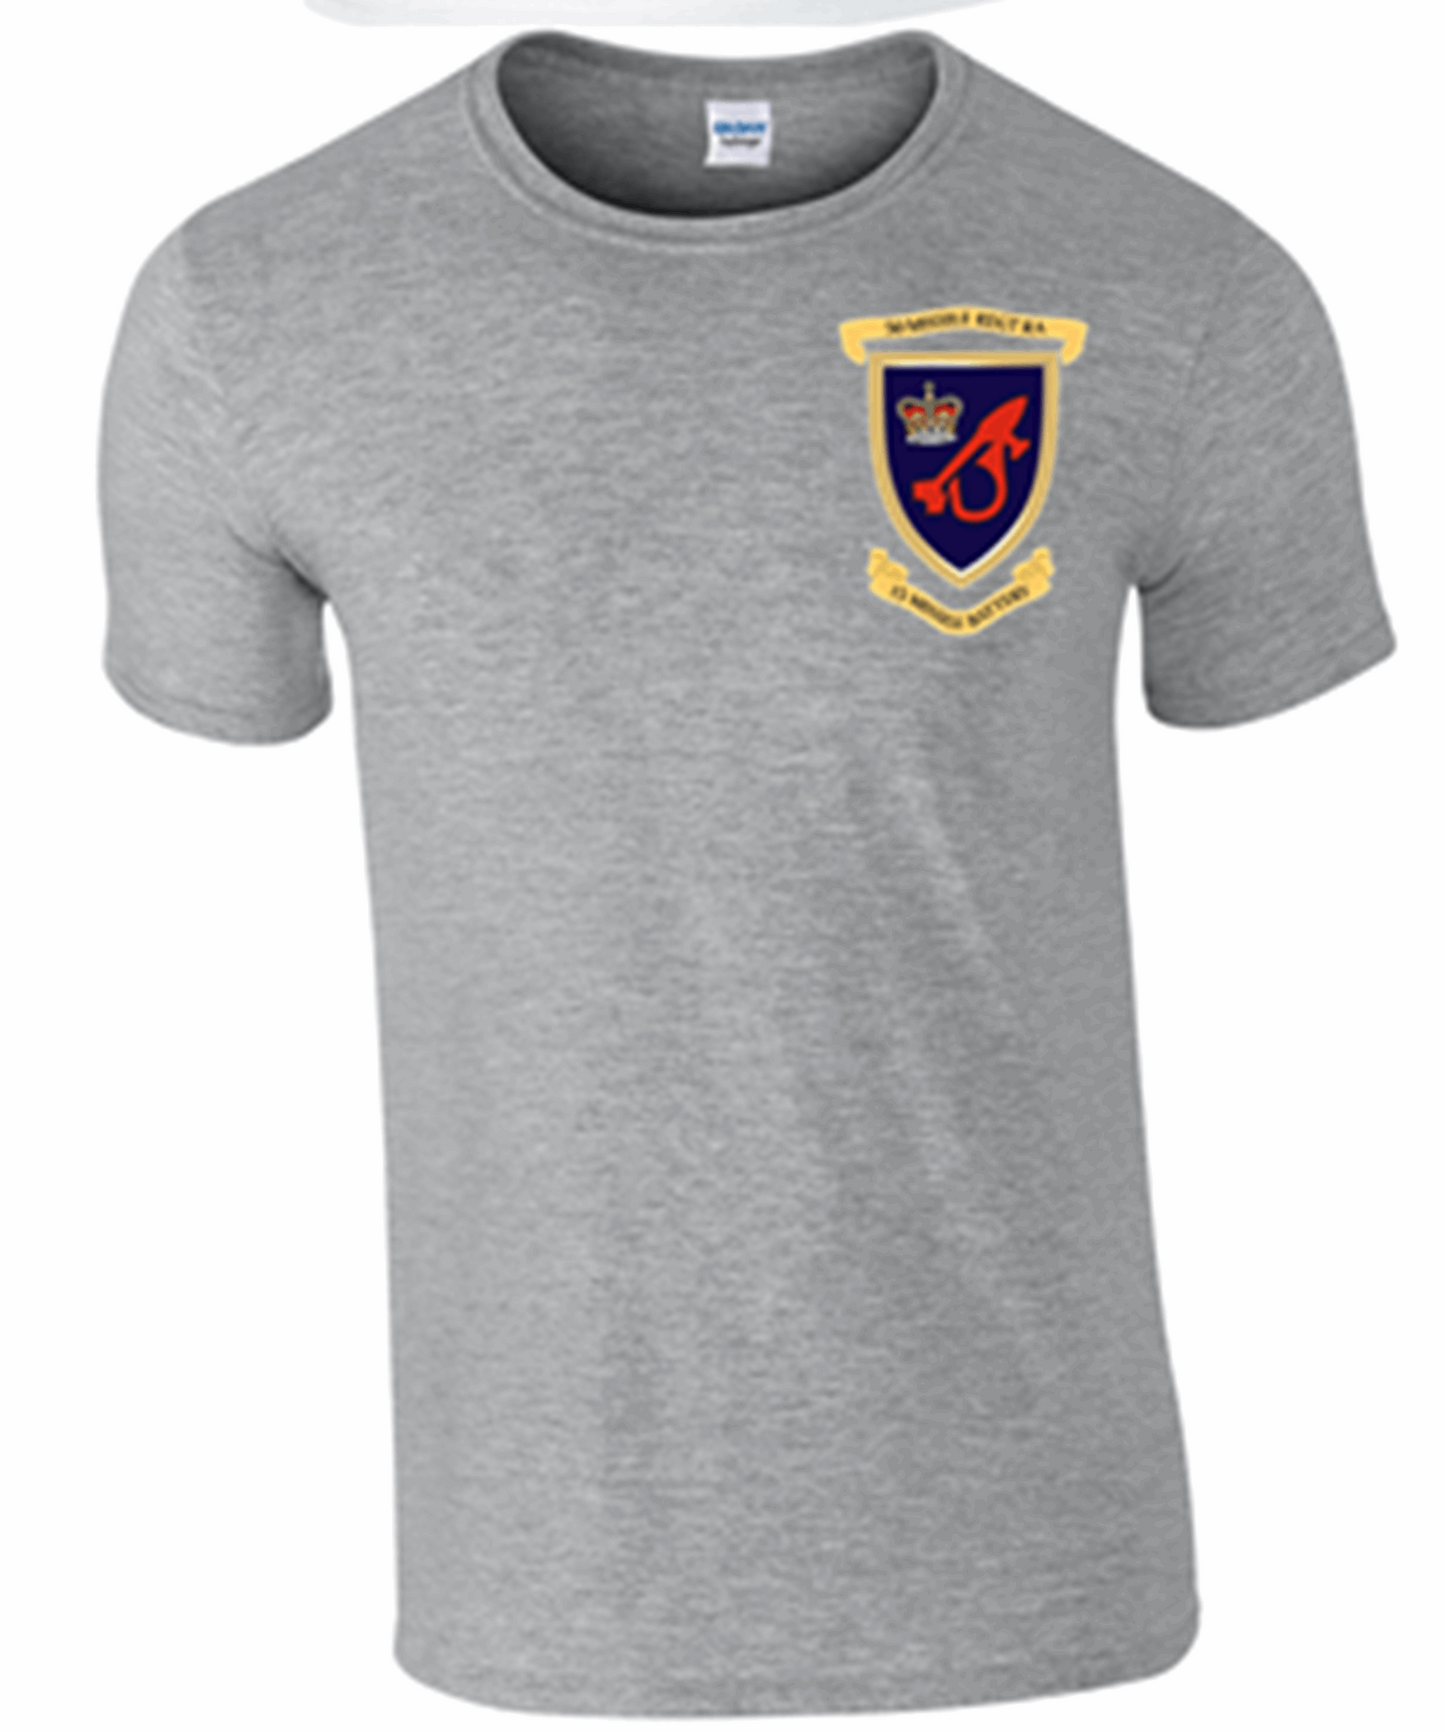 15 Missile Battery T-Shirt RA Front Only - Army 1157 kit S / GRAY Army 1157 Kit Veterans Owned Business